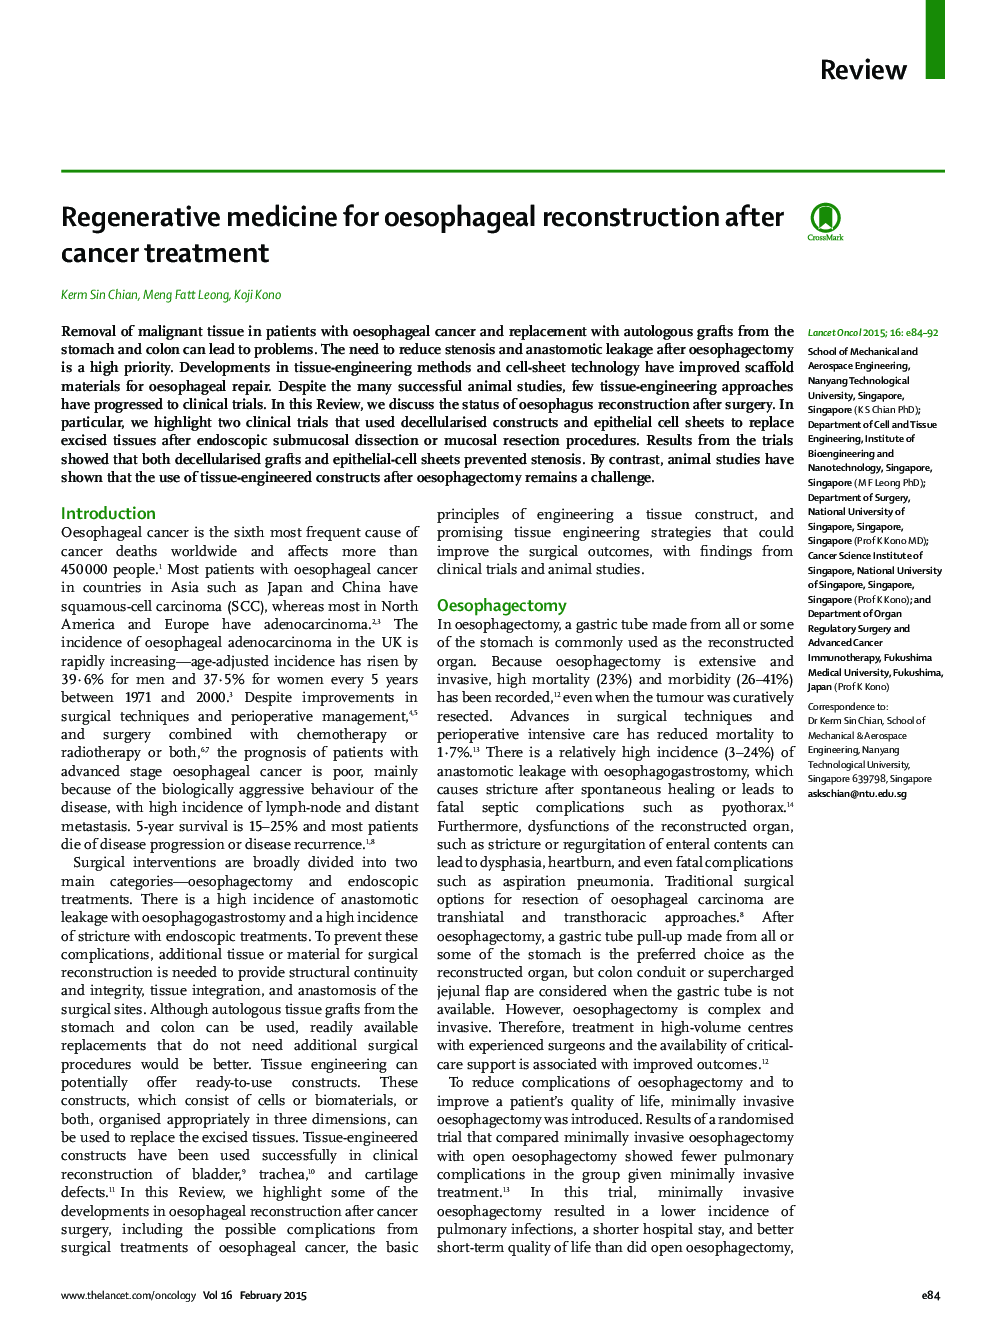 Regenerative medicine for oesophageal reconstruction after cancer treatment